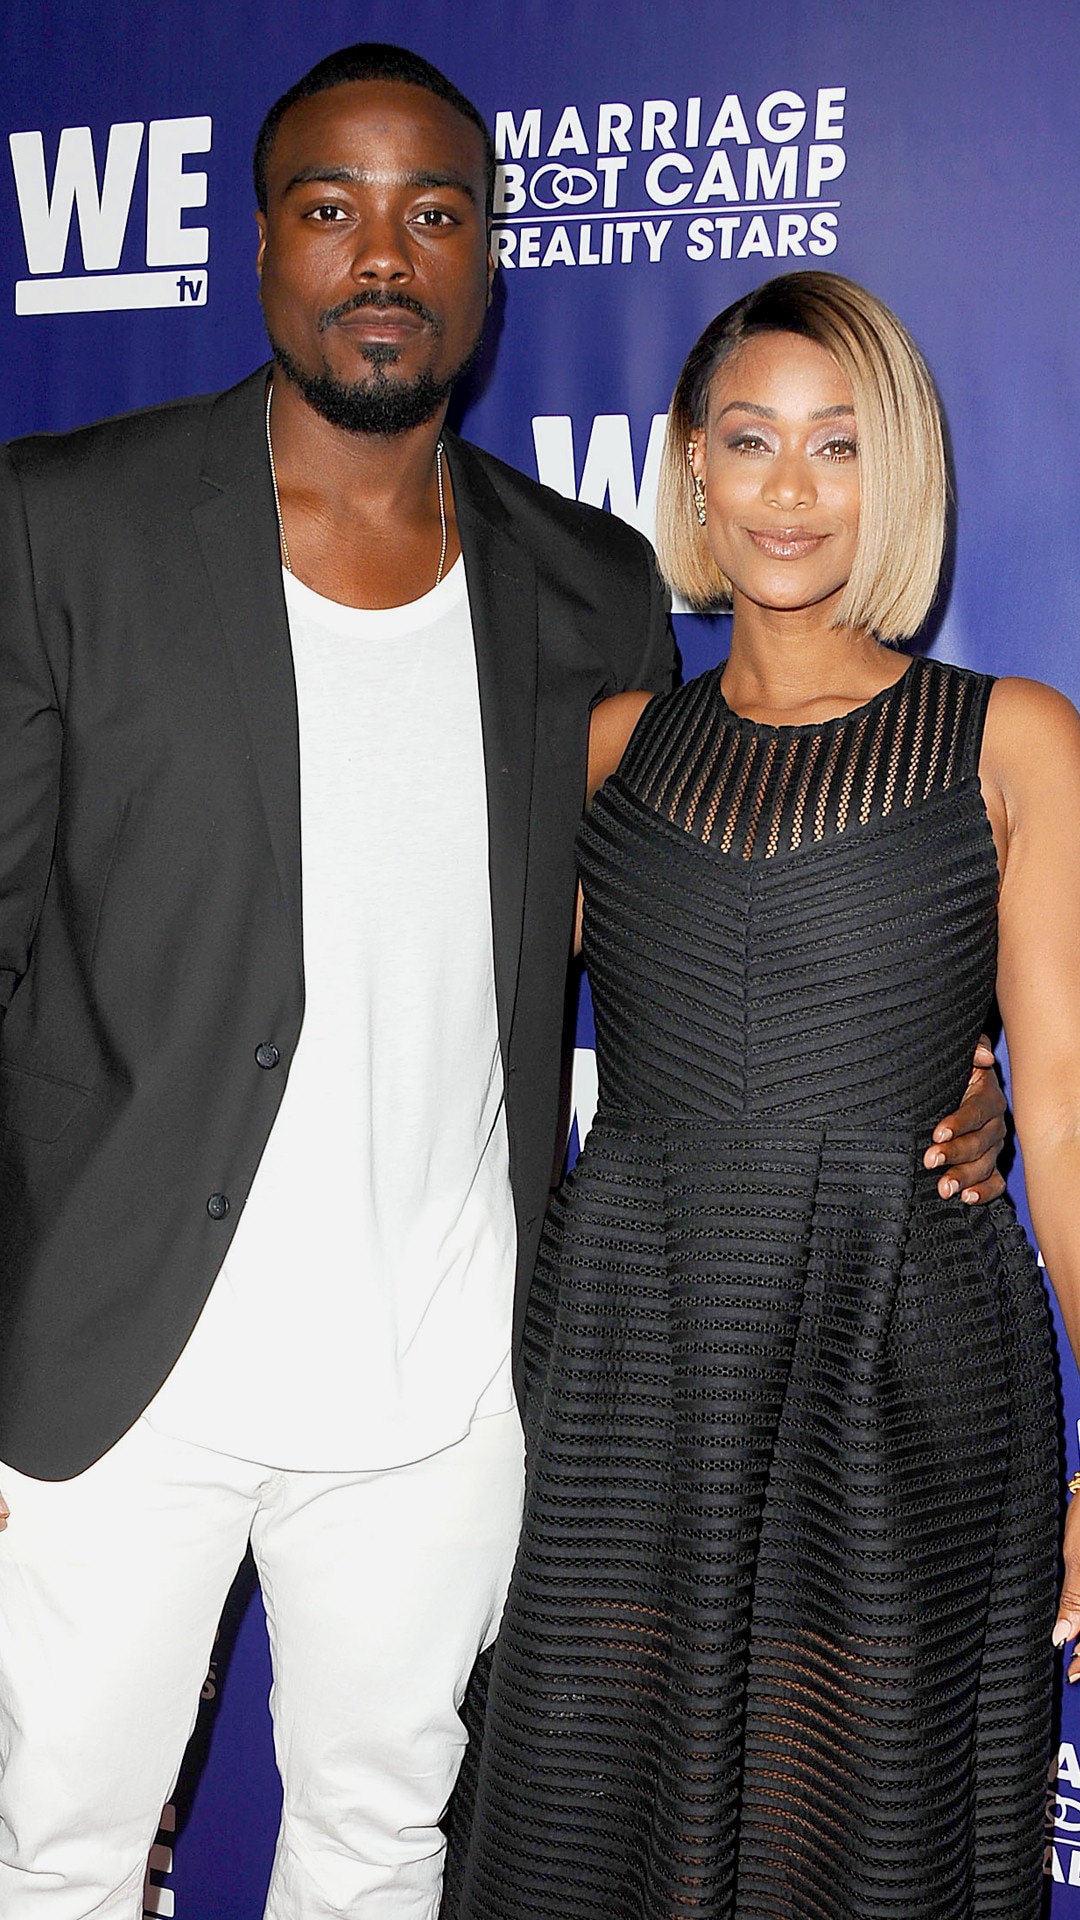 Tami Roman & Reggie Youngblood from 2019 Celebrity Weddings E! News